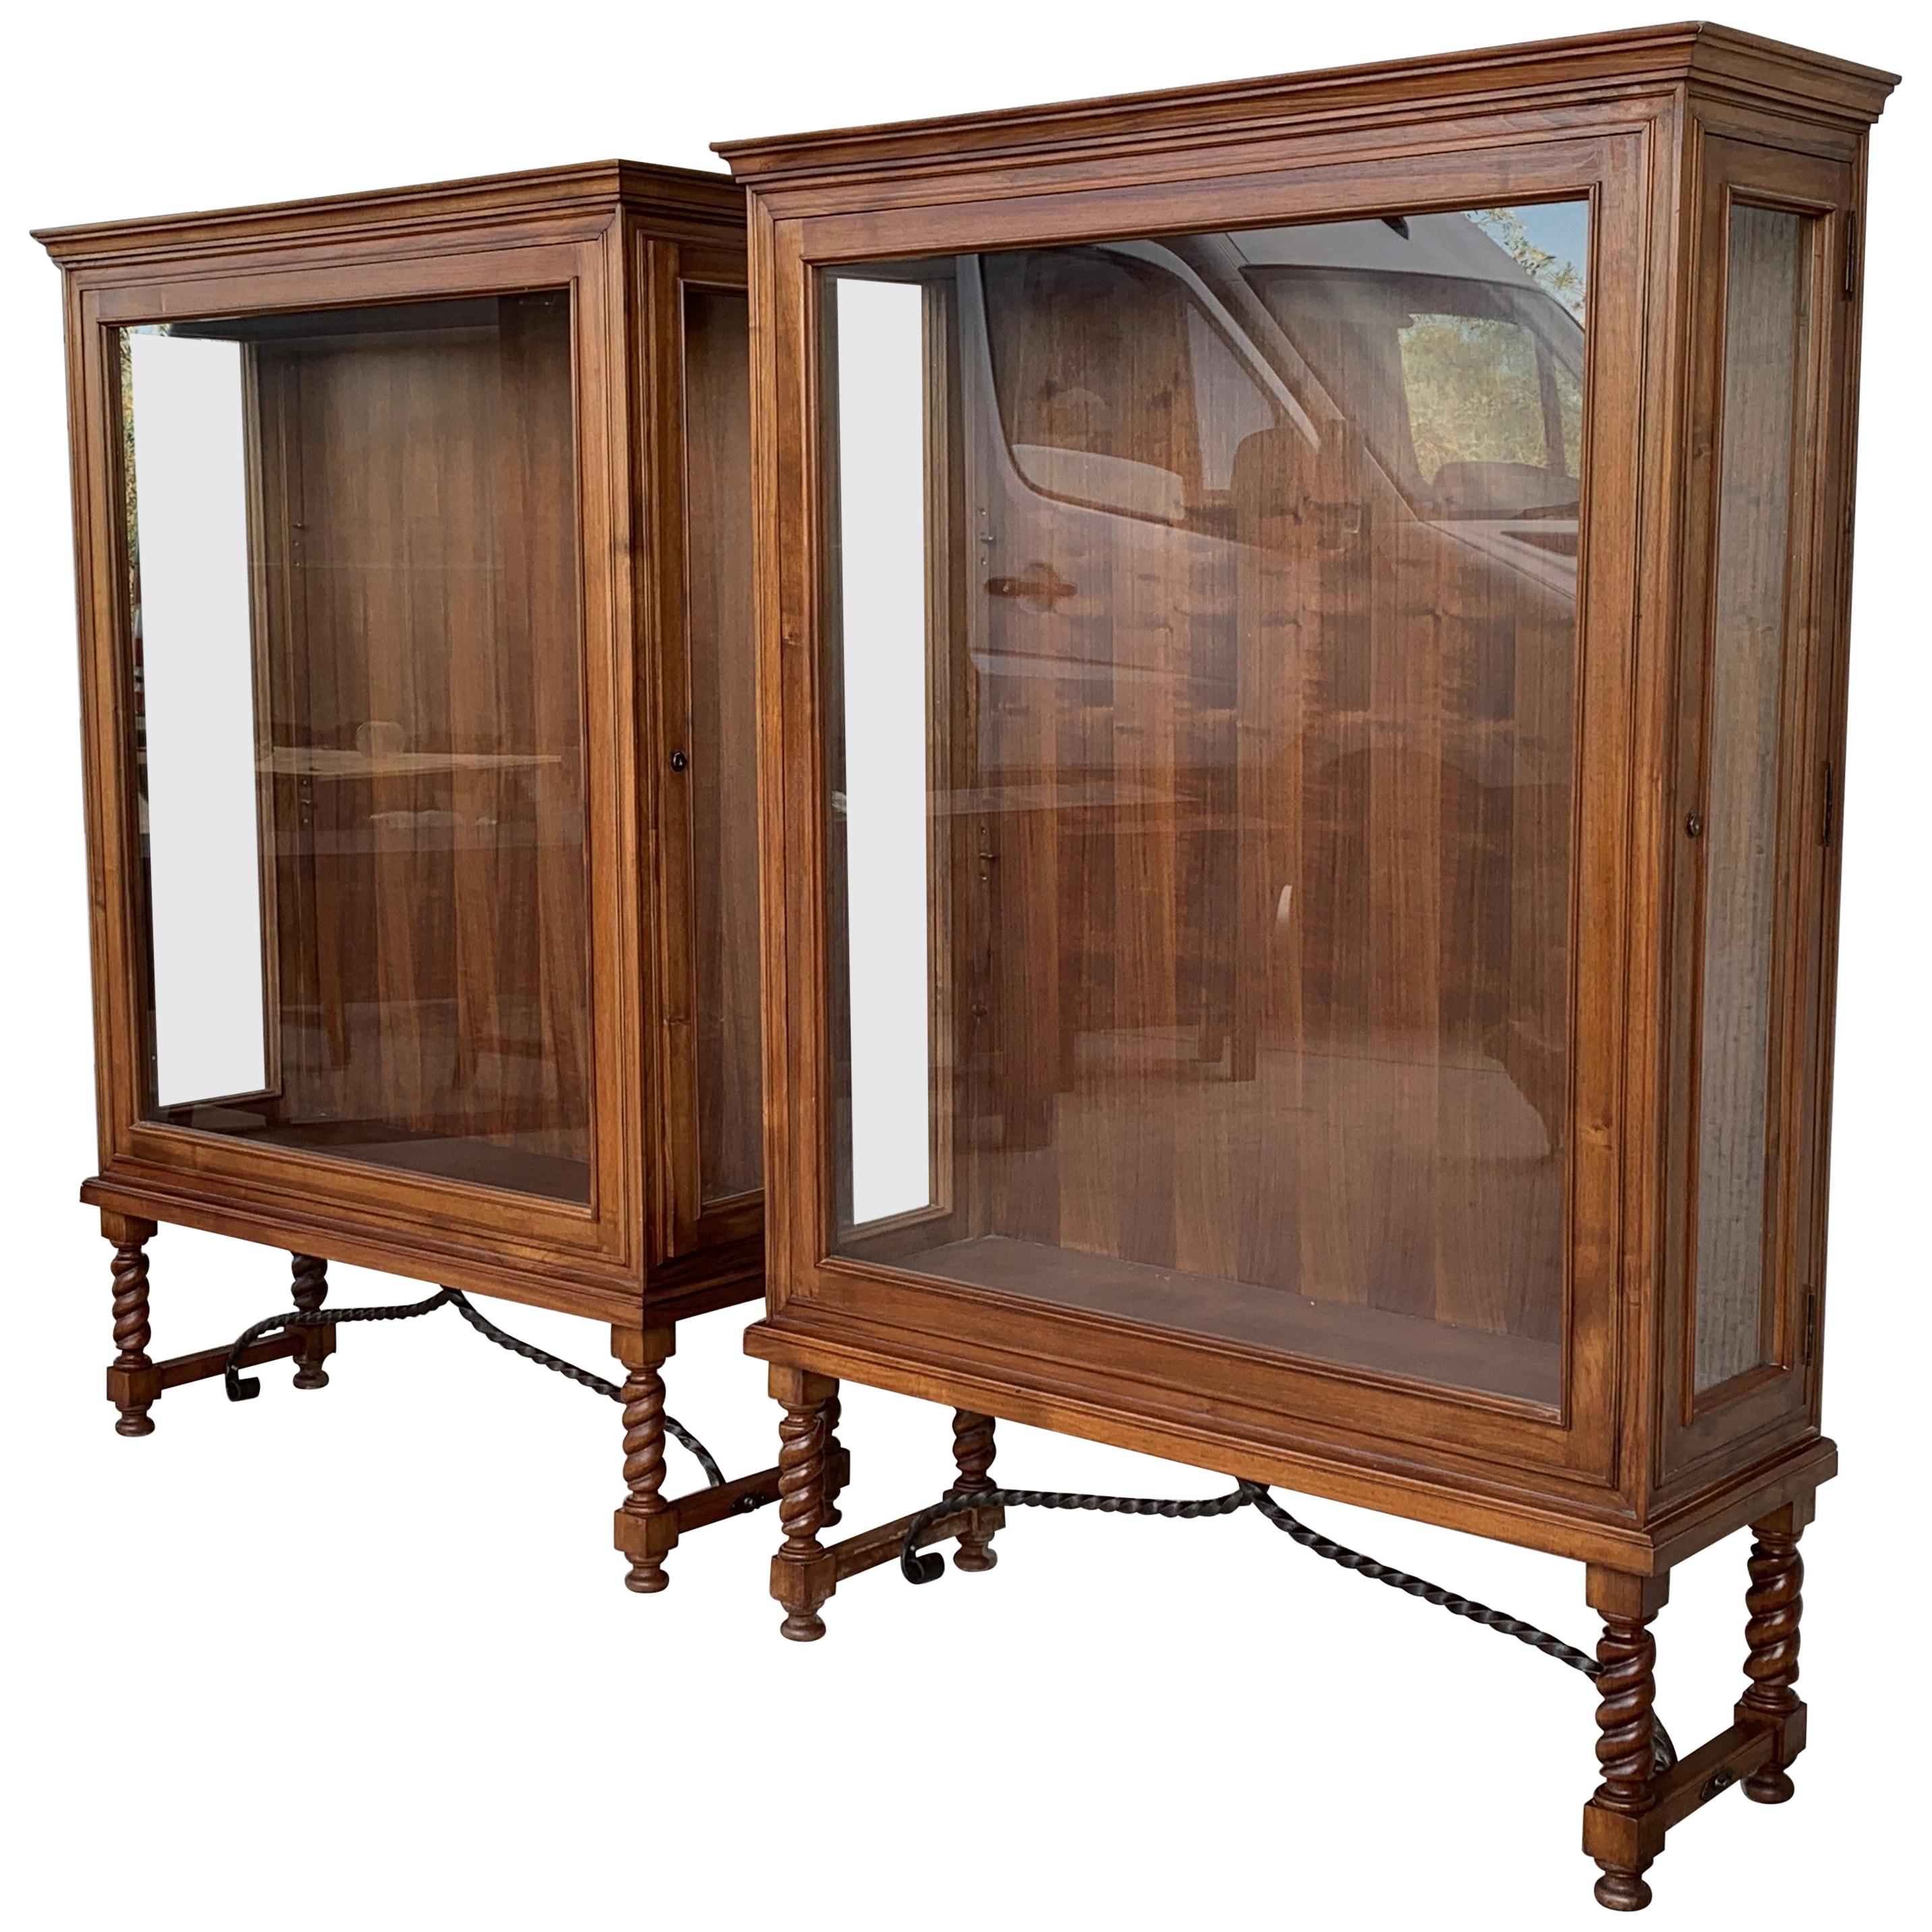 Spanish Colonial Pair of Display Cabinets or Vitrines with Side Opening